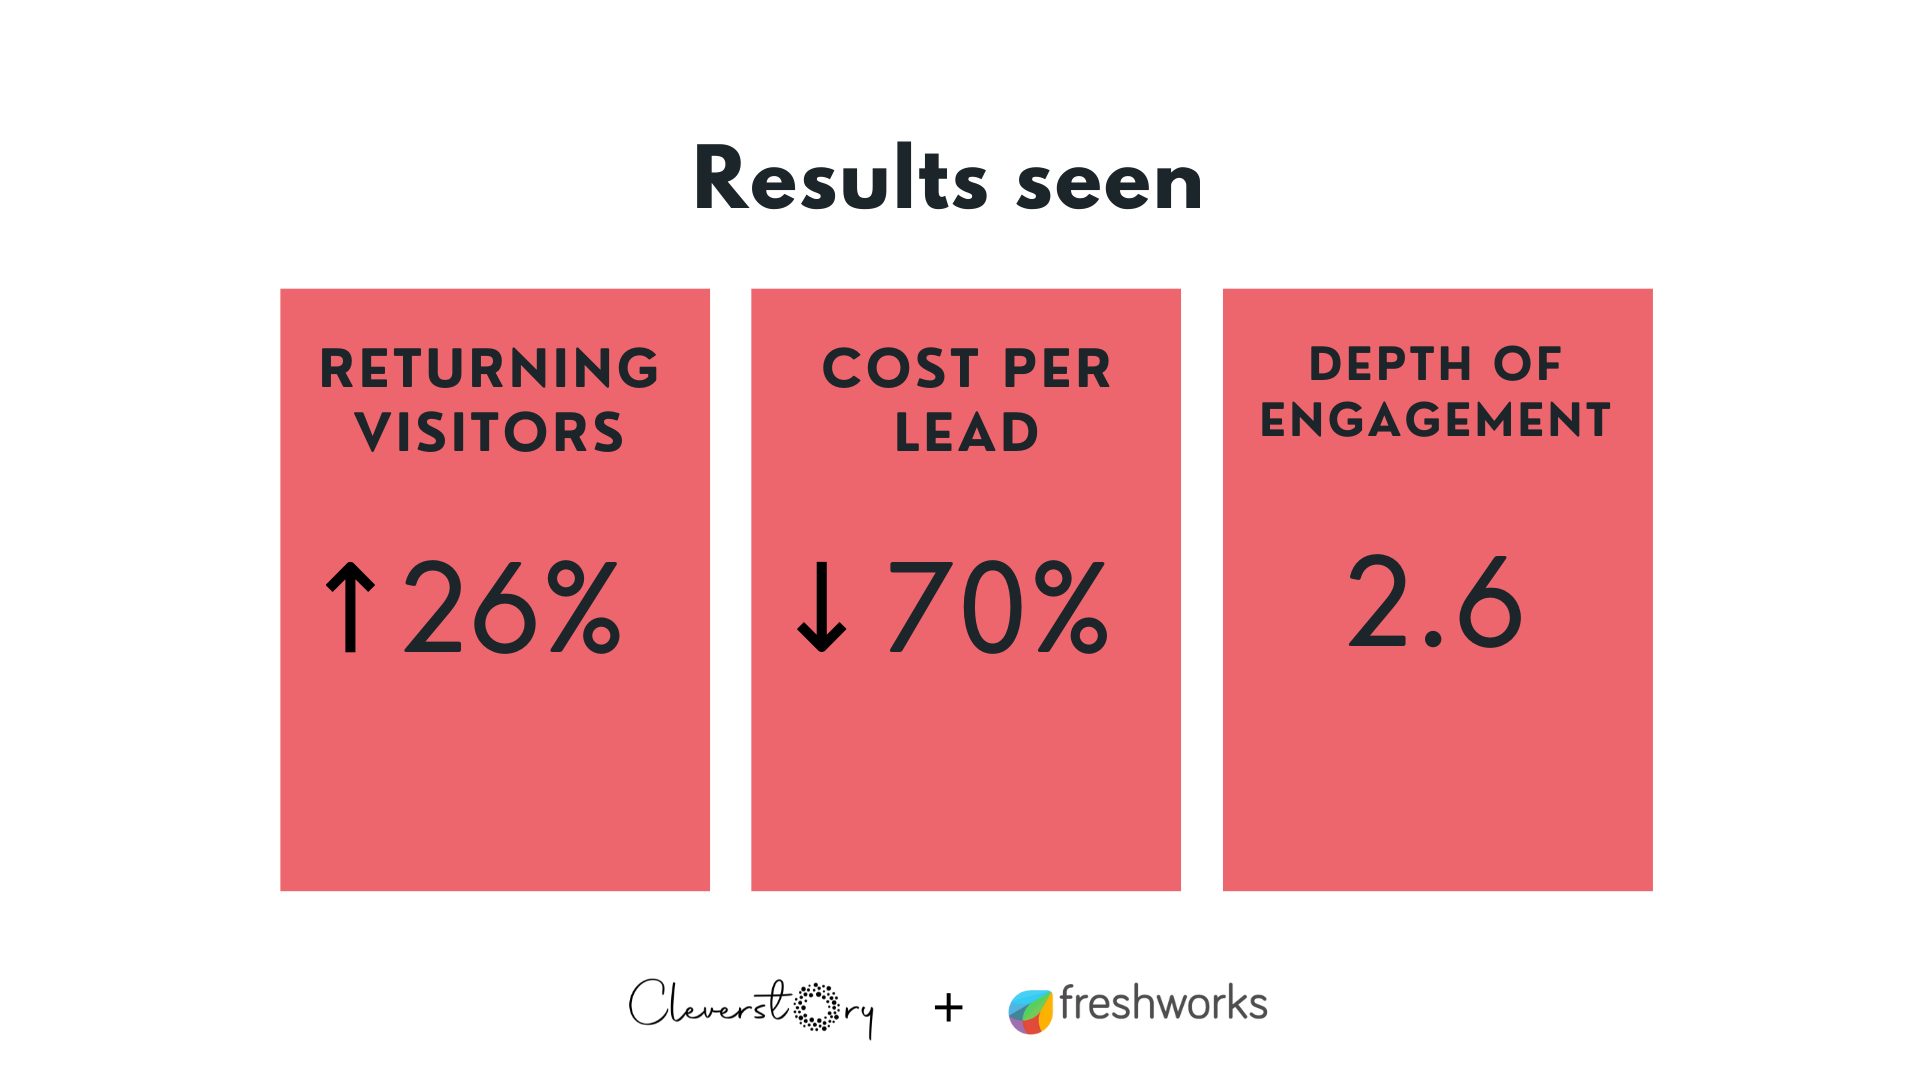 Results seen by Freshworks for the Happy Sales Campaign built on Paperflite's Cleverstory